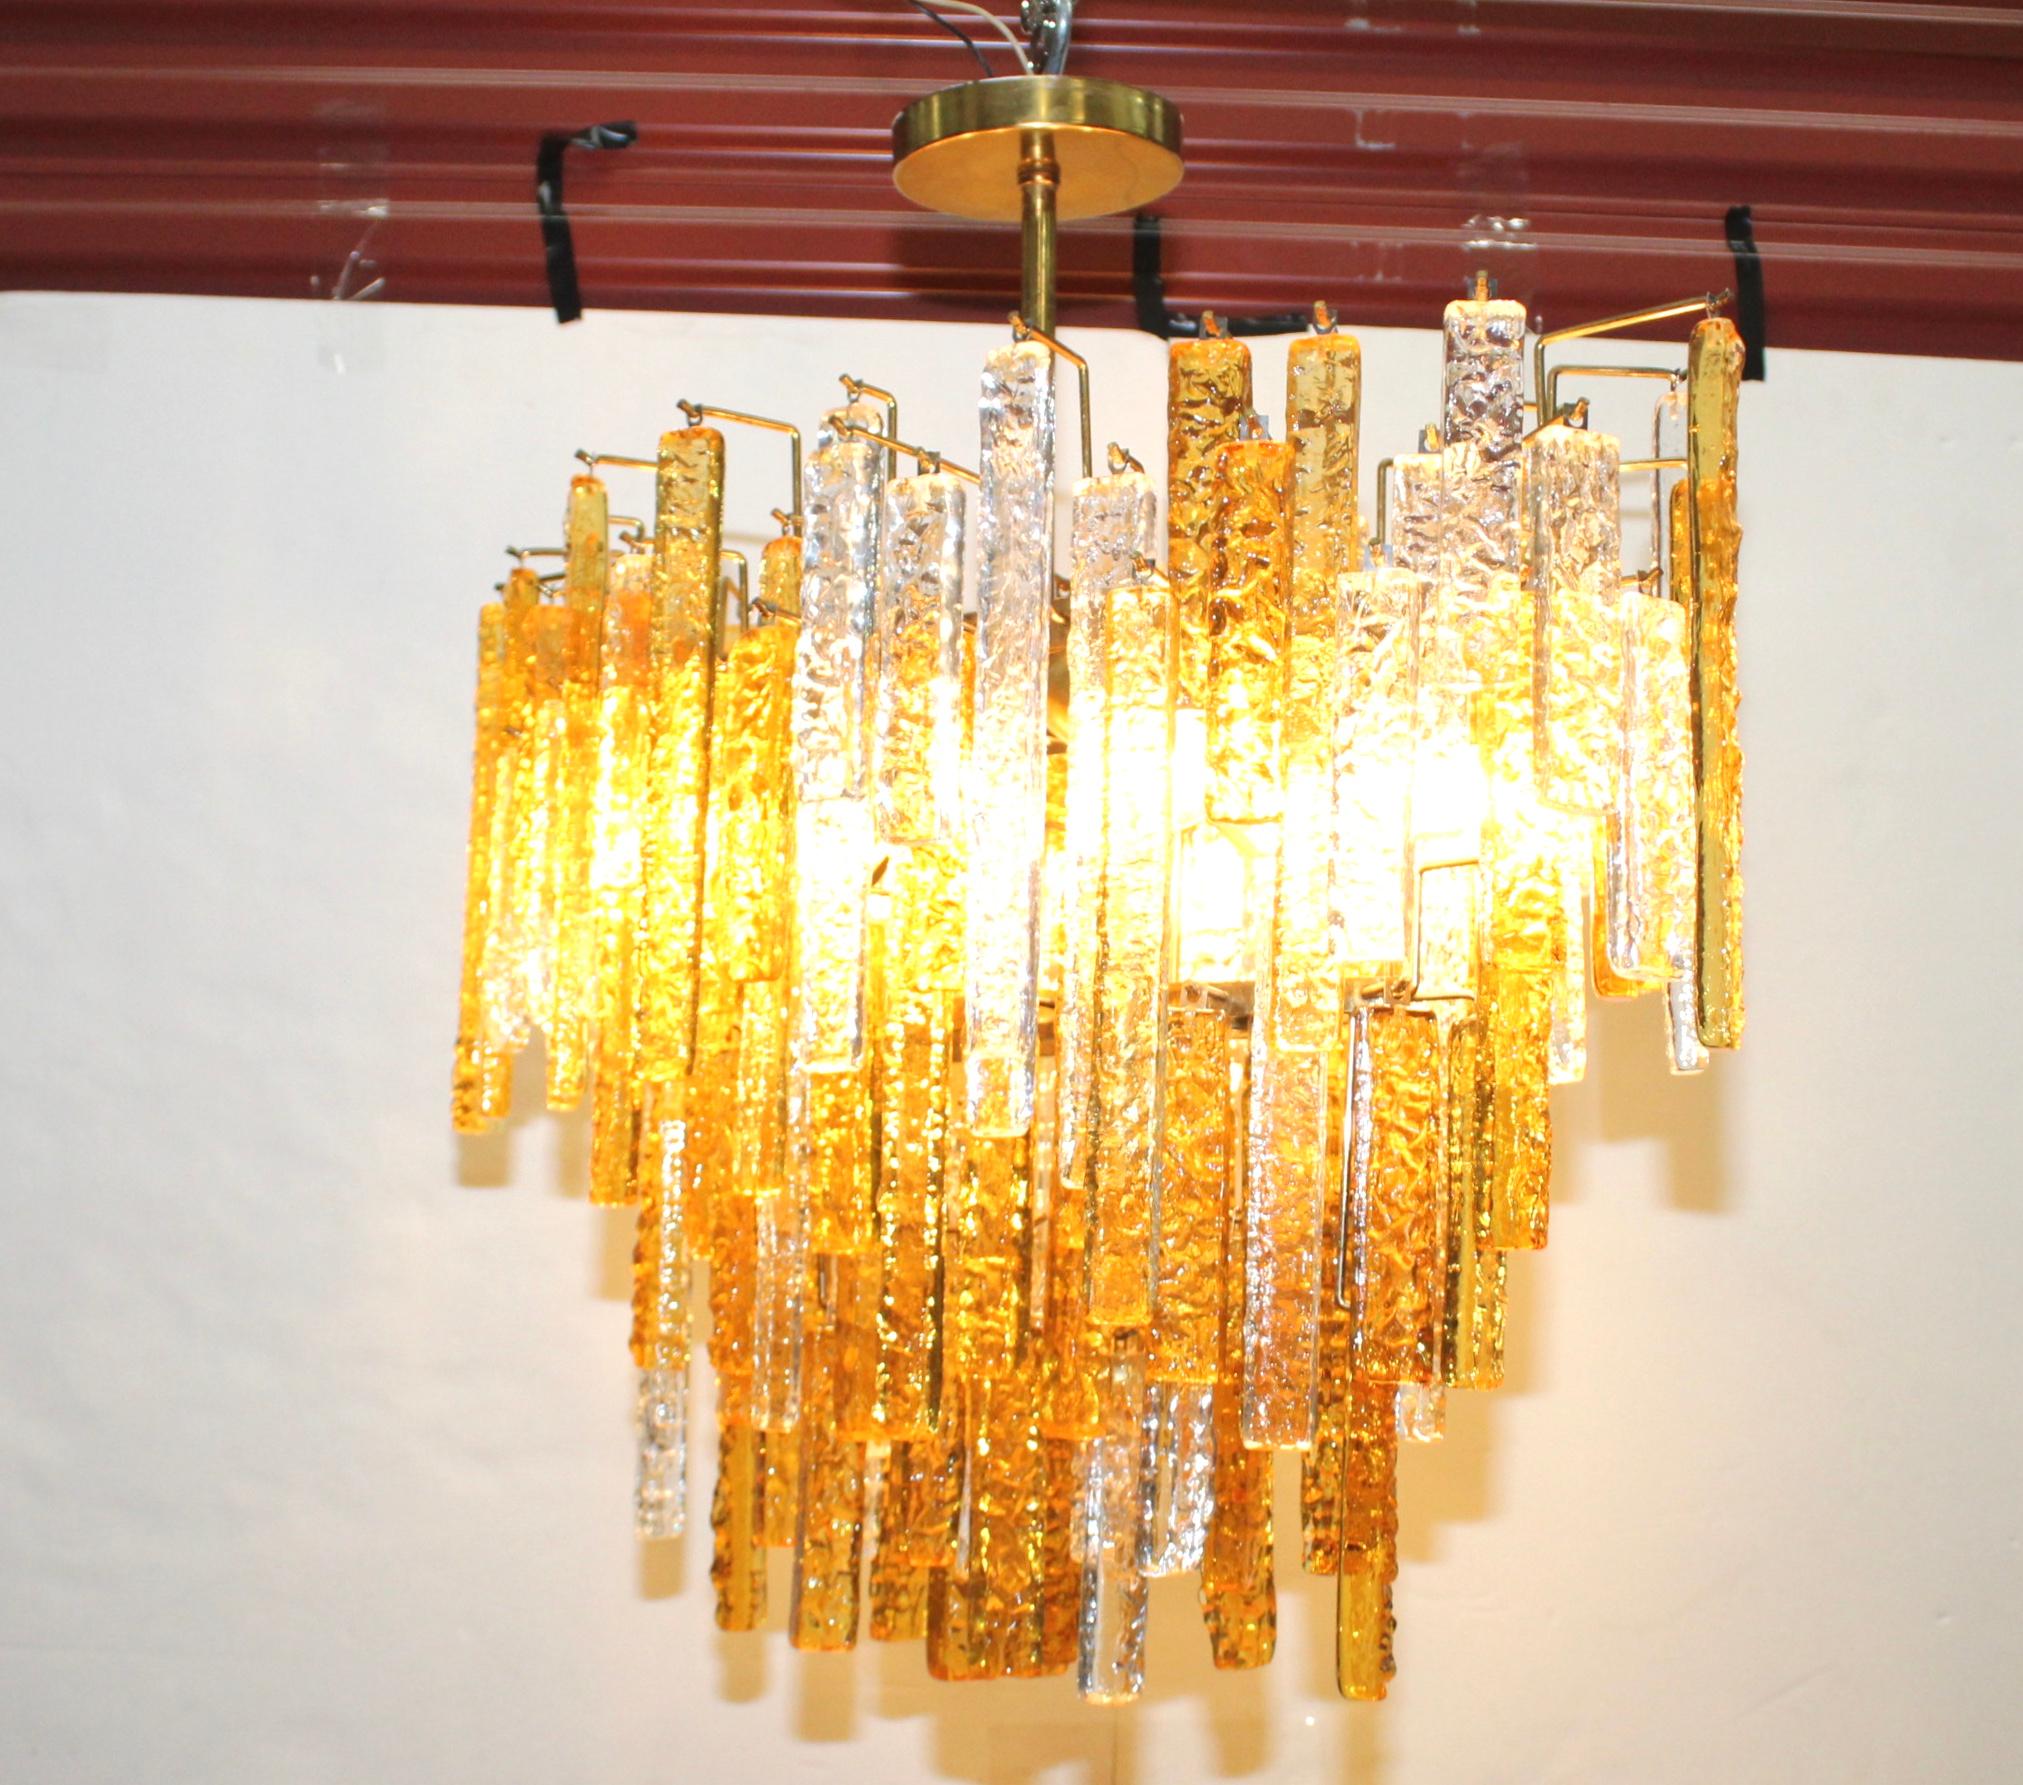 Mid-20th Century 1960s Mid-Century Modern Venini Glass Oval Chandelier For Sale